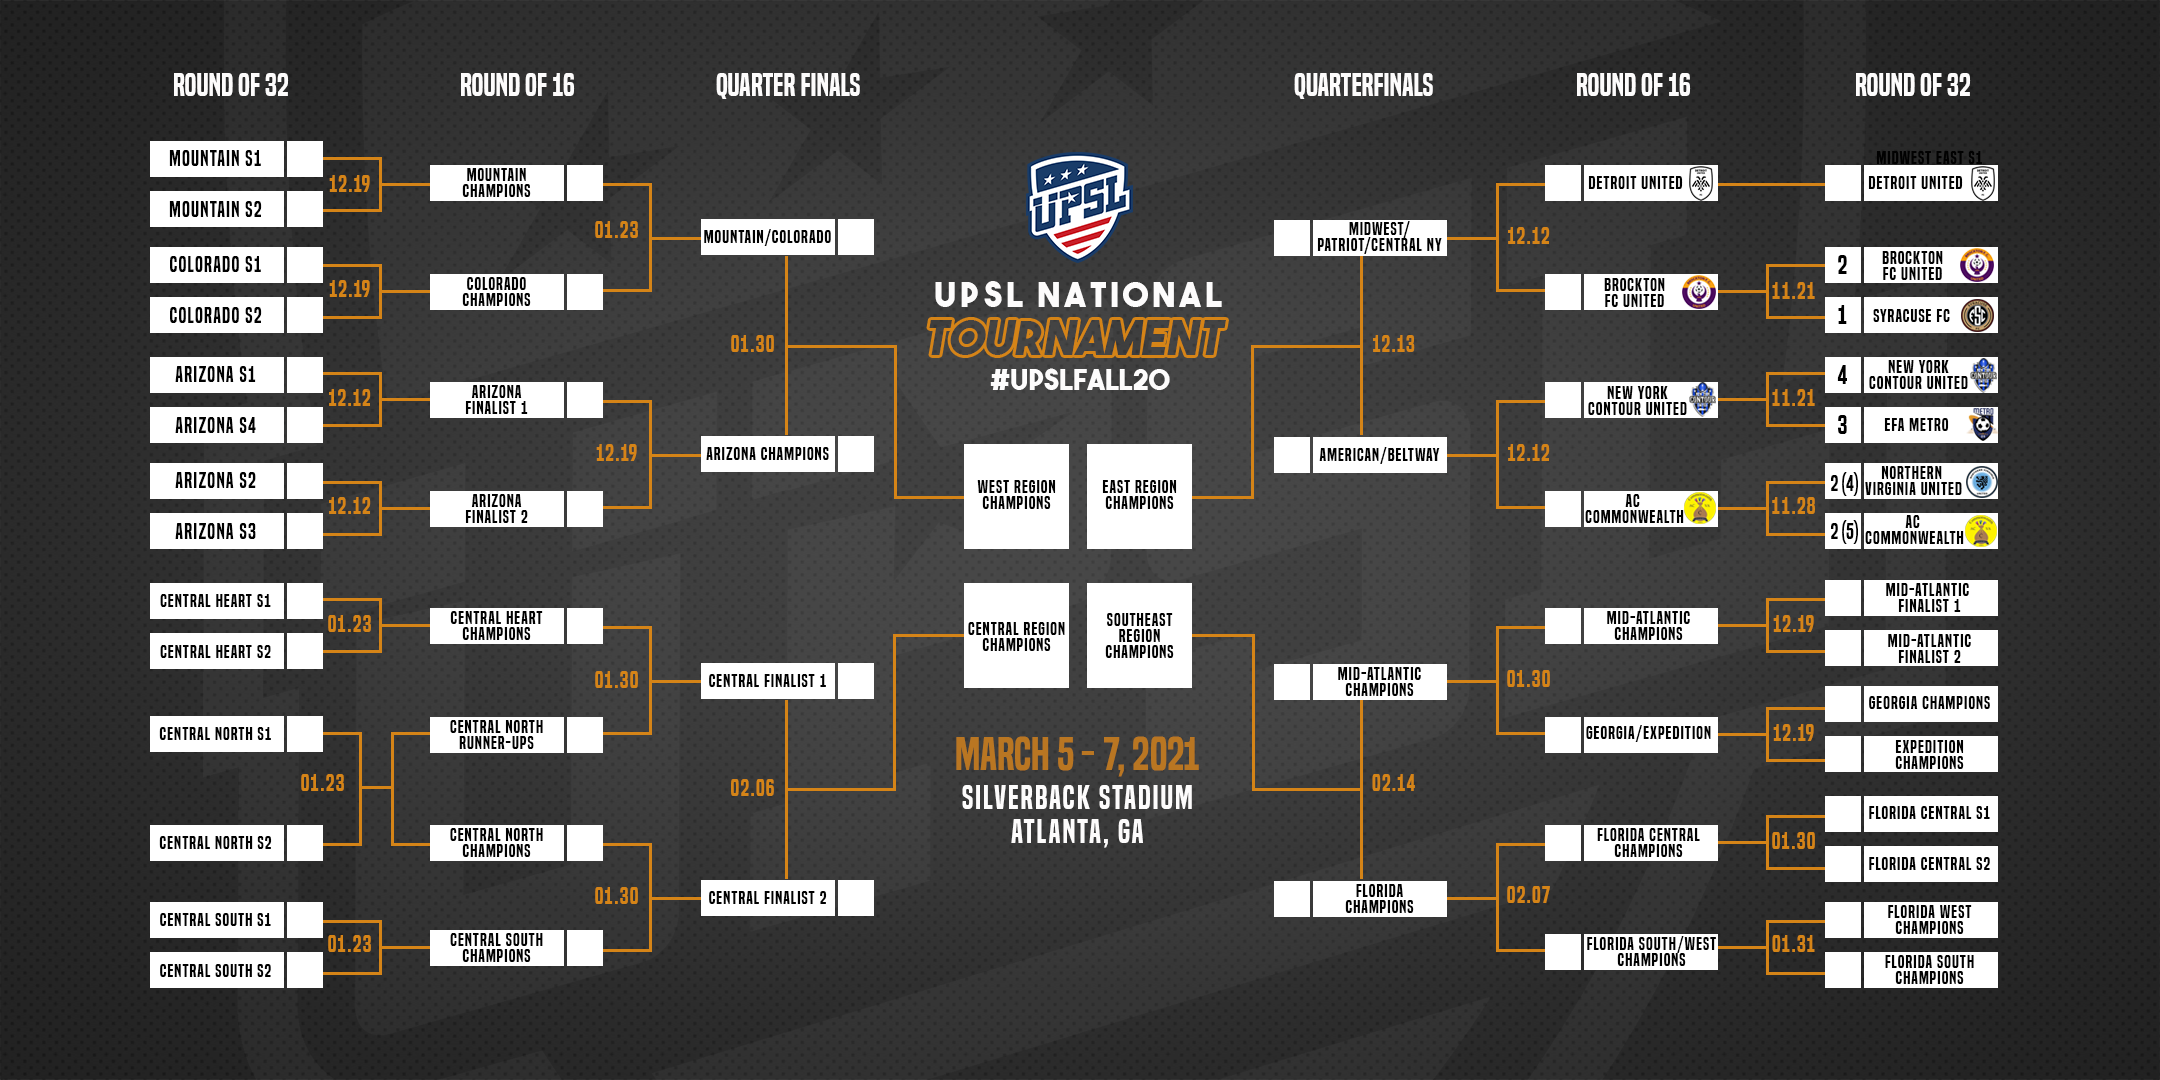 UPSL Announces National Playoff Structure and Championship Finals in